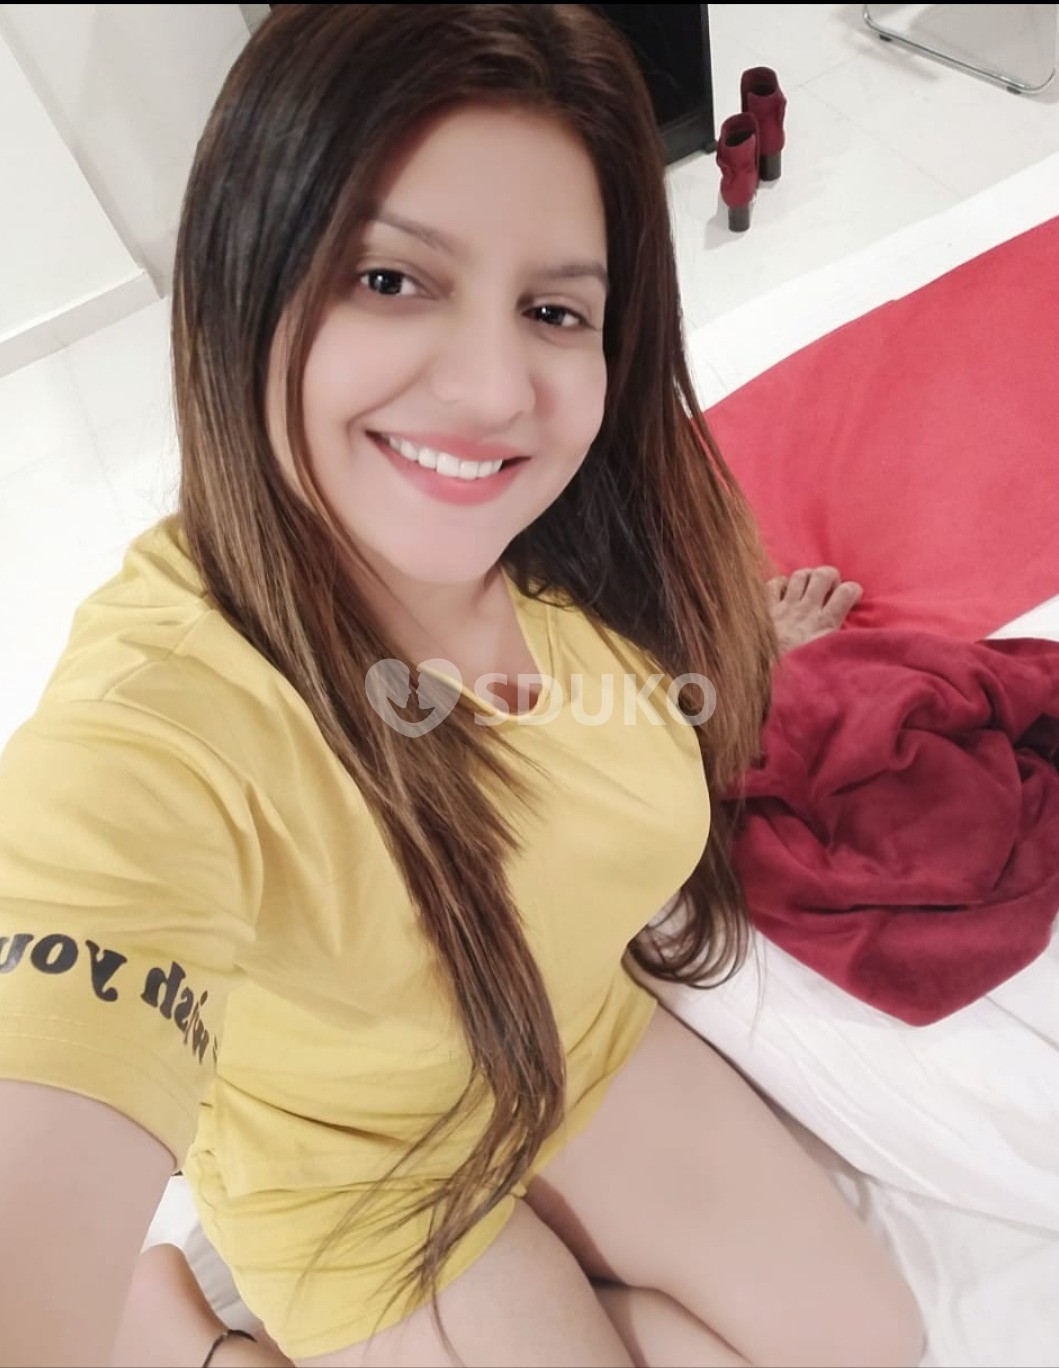 INDIRANAGAR HOT 💋👅 VIP MODEL AVAILABLE ANAL ORAL BLOWING AVAILABLE